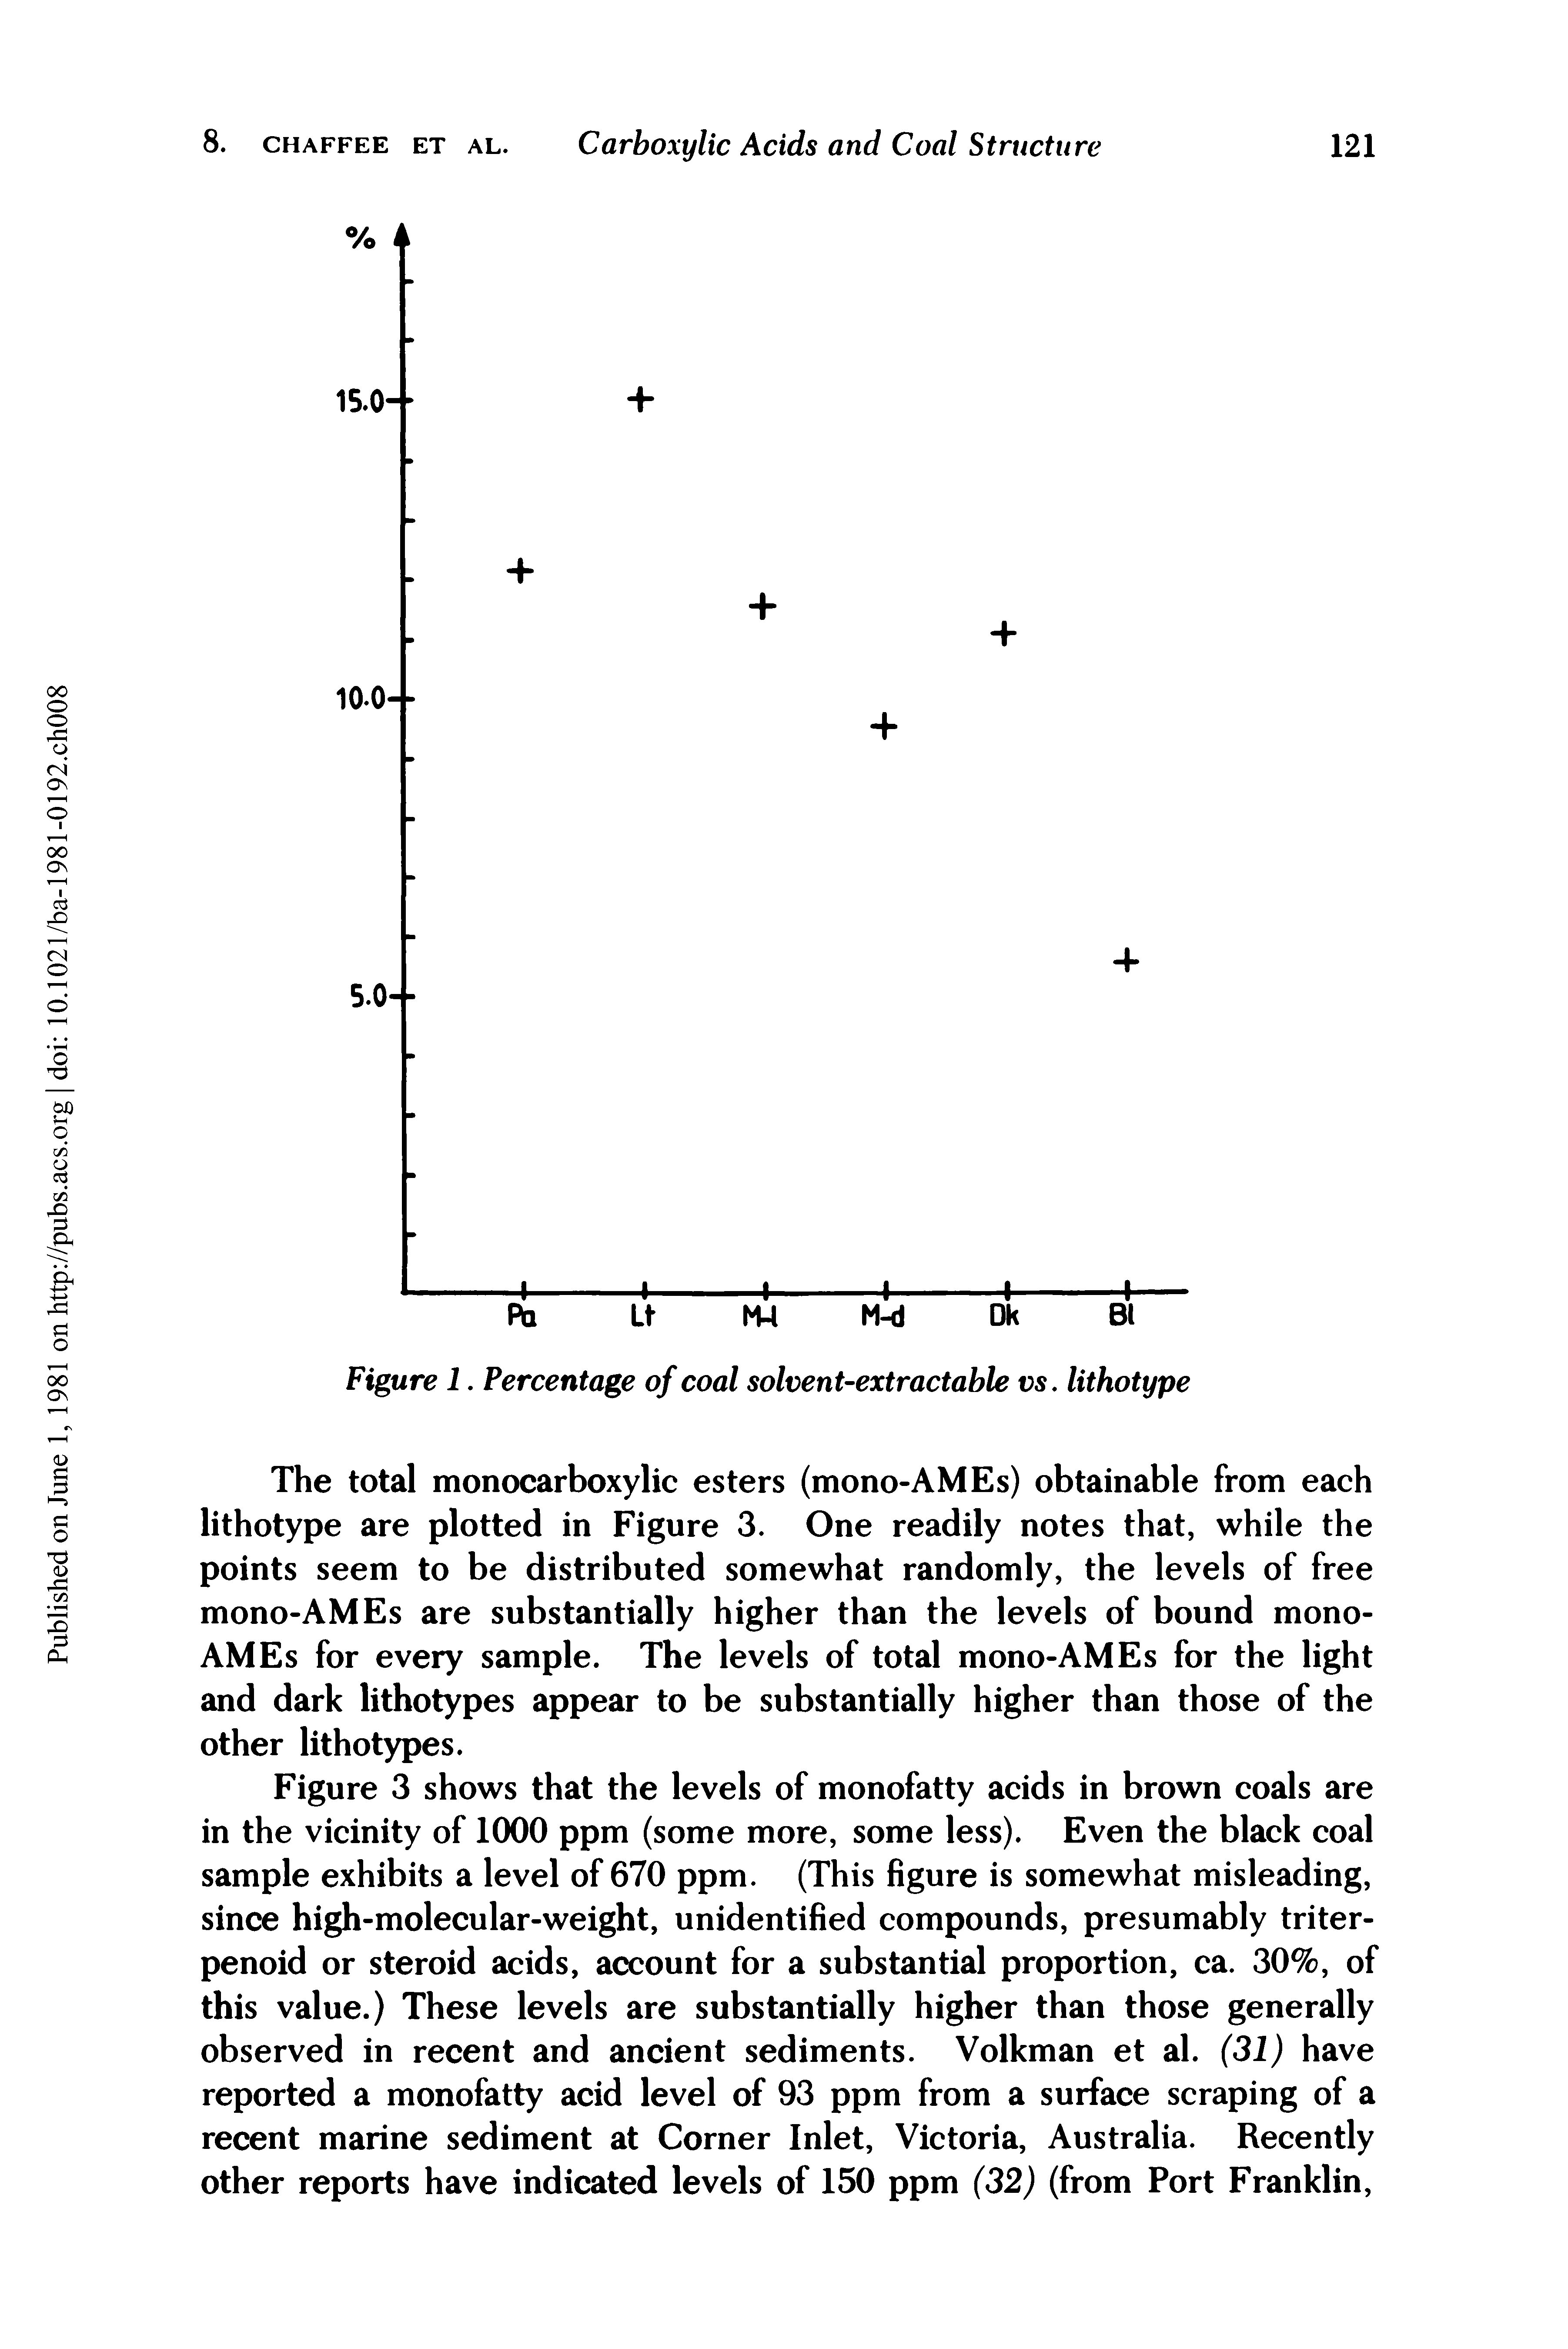 Figure 1. Percentage of coal solvent-extractable vs, lithotype...